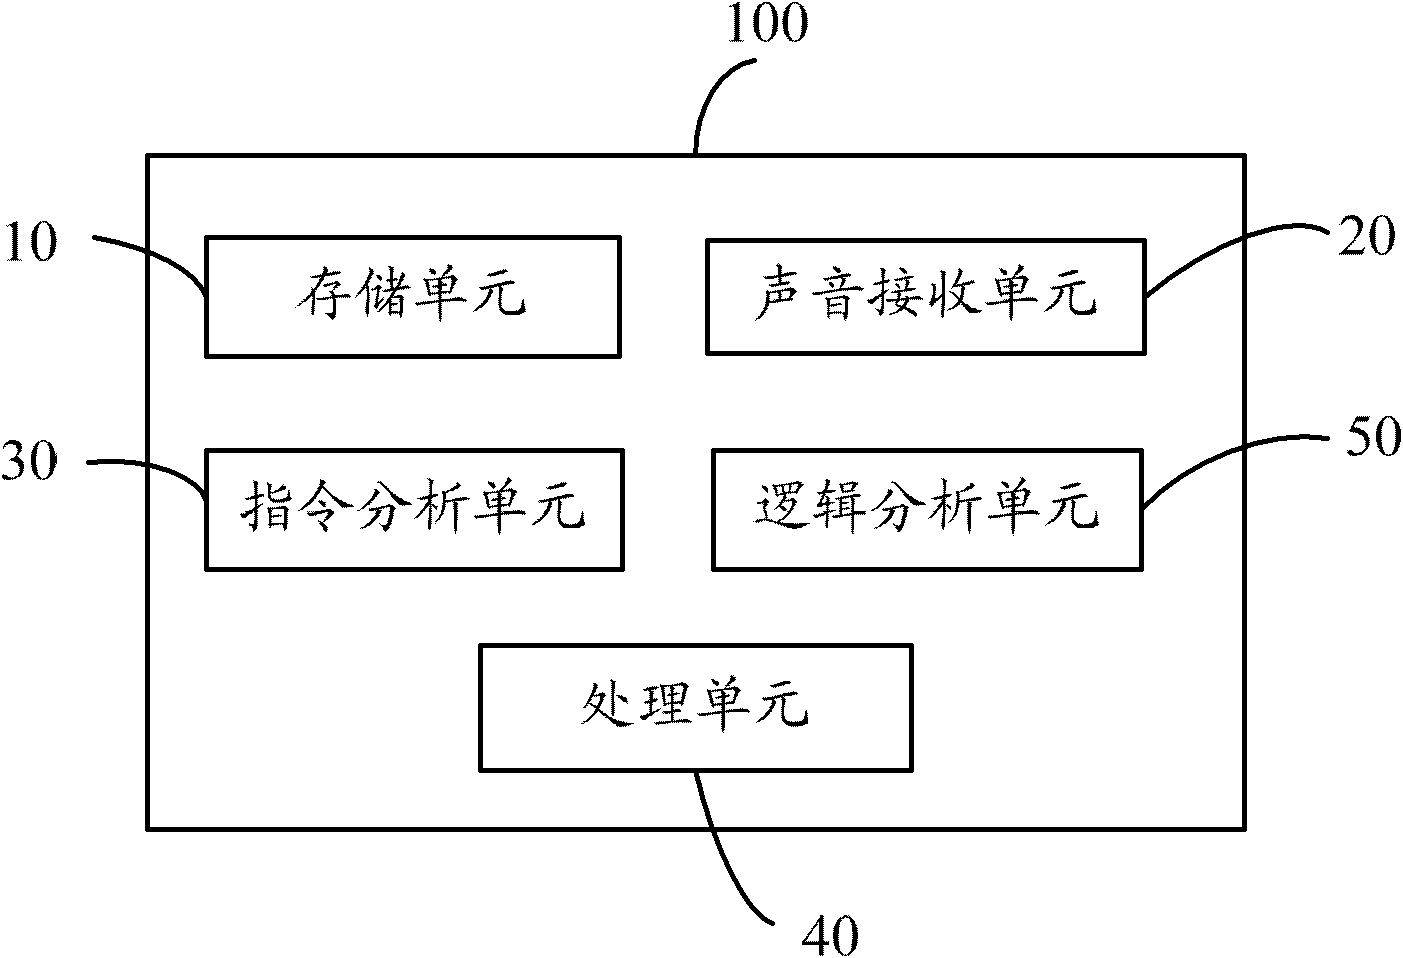 Electronic device with voice-controlling function and voice-controlling method